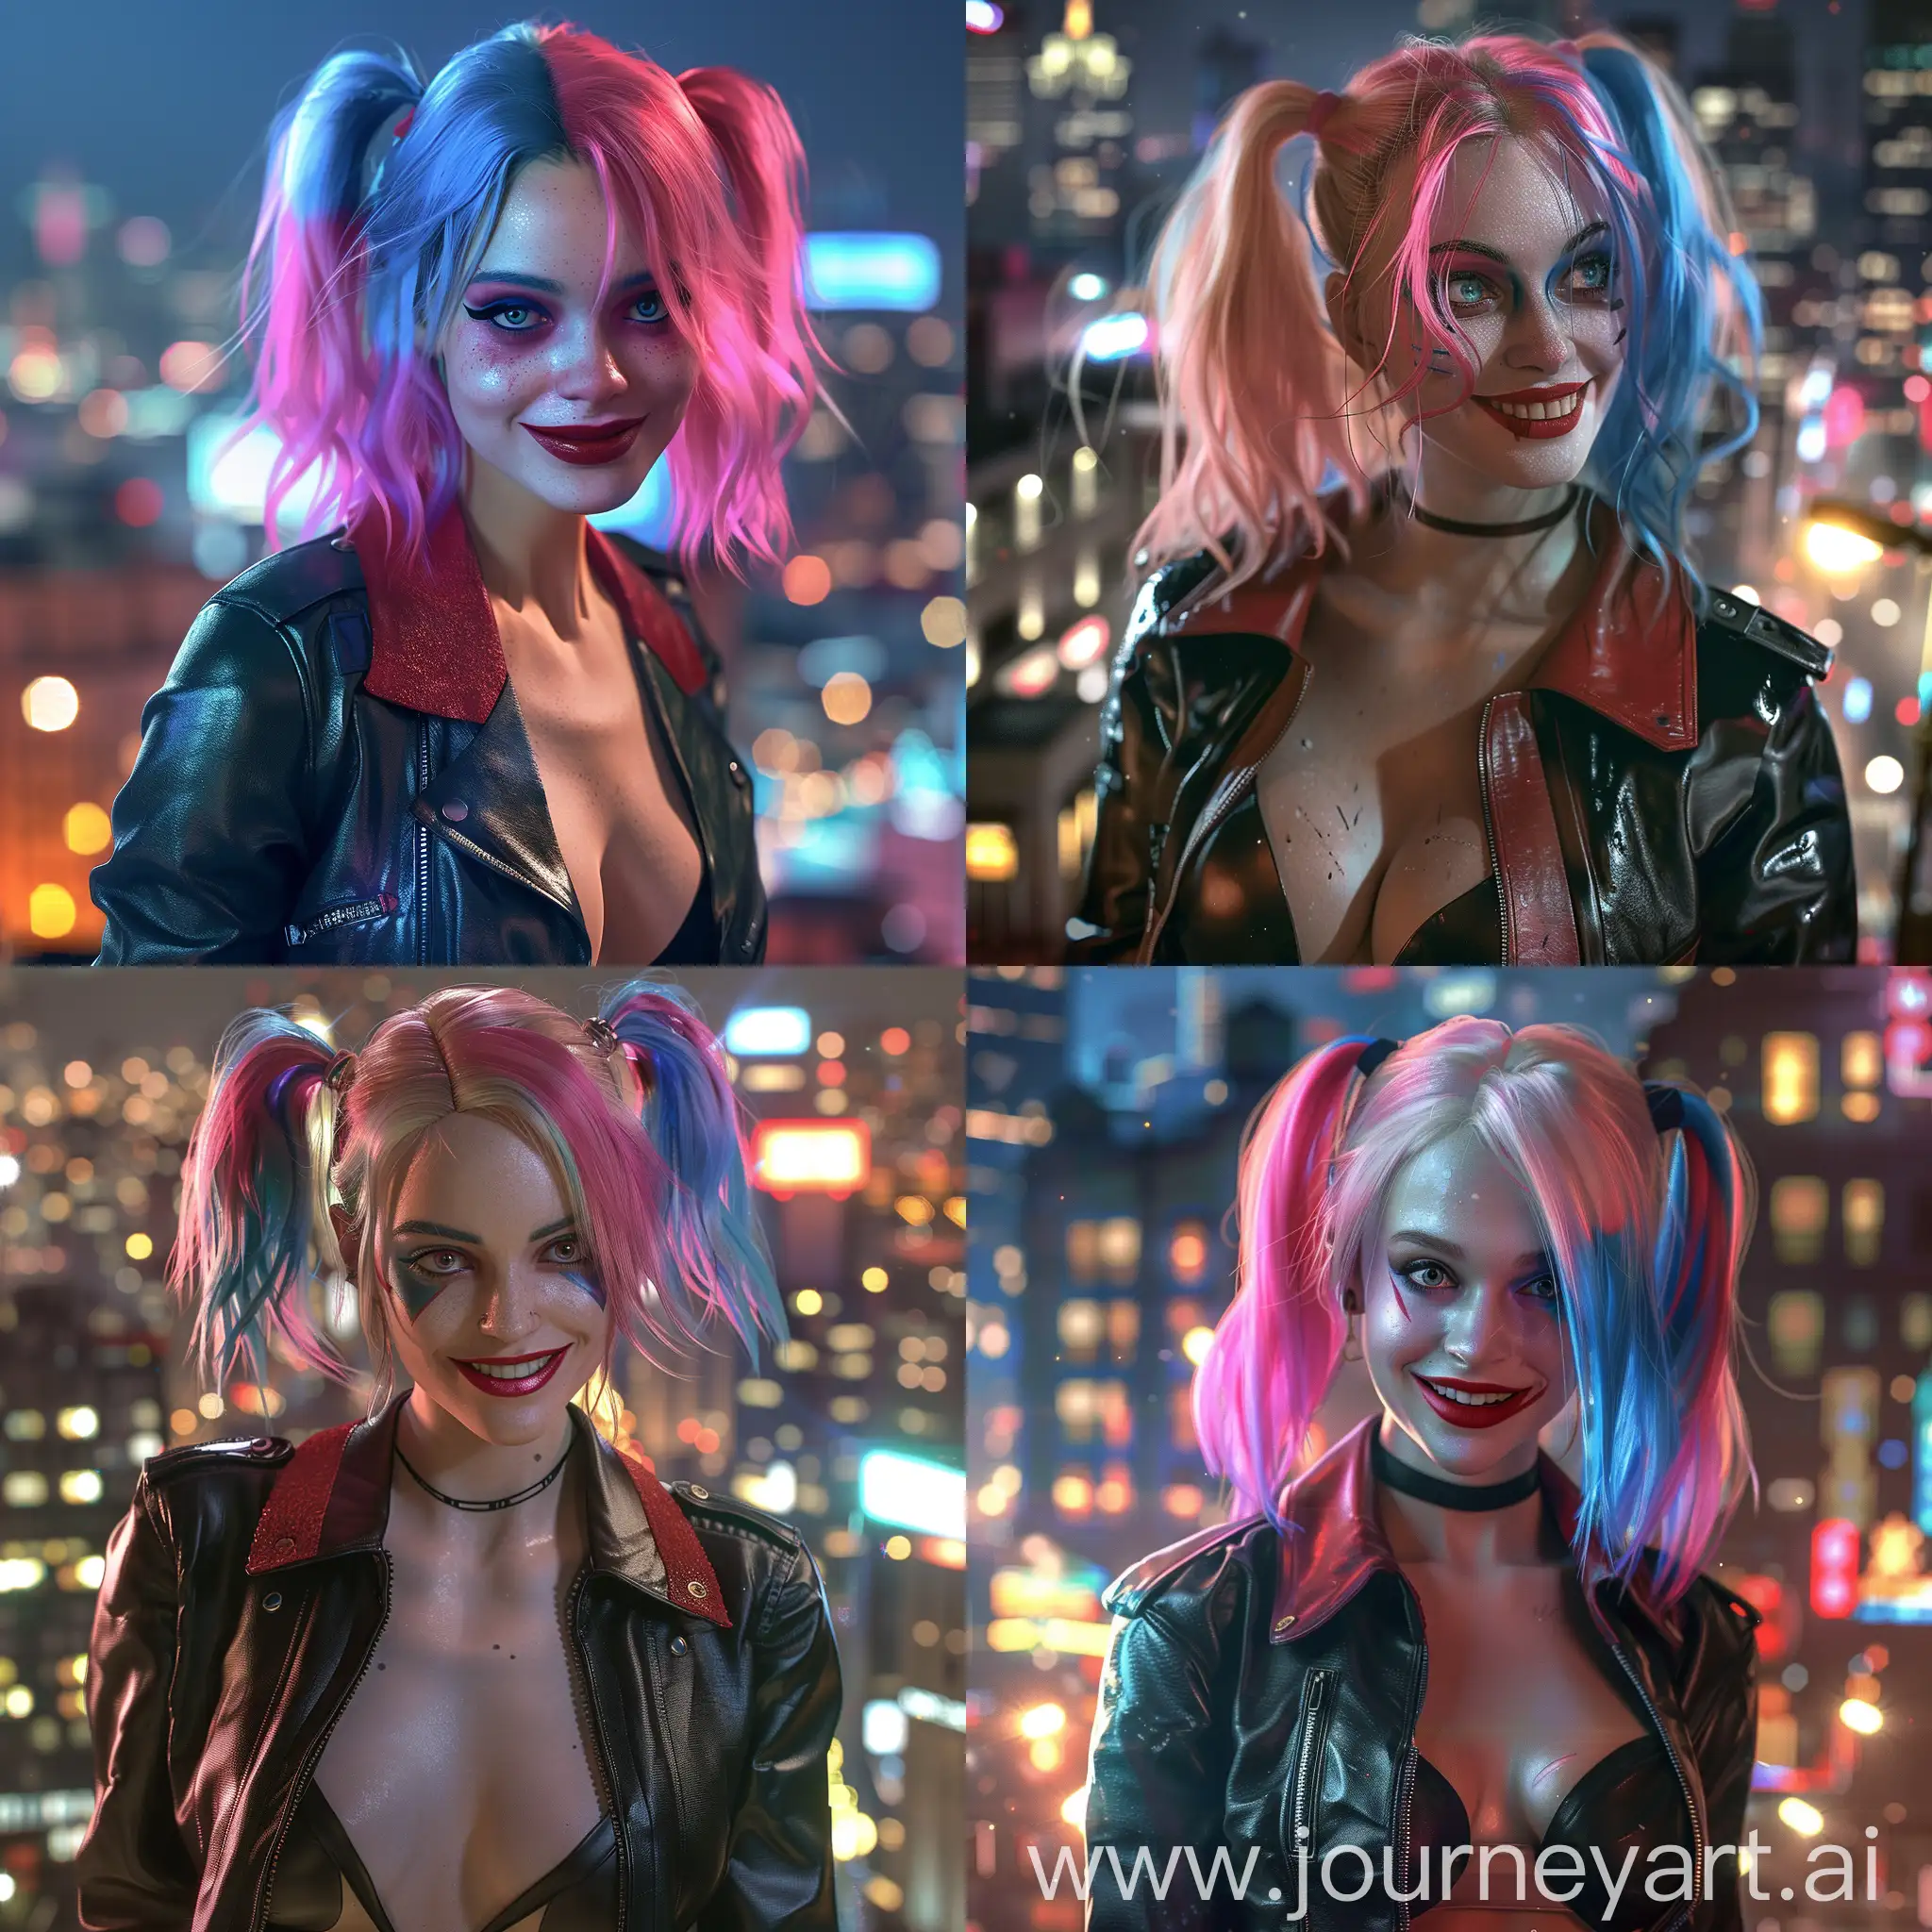 Hyper realistic photo of Harley Quinn in the city. She has pink and blue hair, a black leather jacket with a red collar, and a tight body suit underneath. She is smirking at the camera with city lights behind her and cinematic lighting like a movie scene.